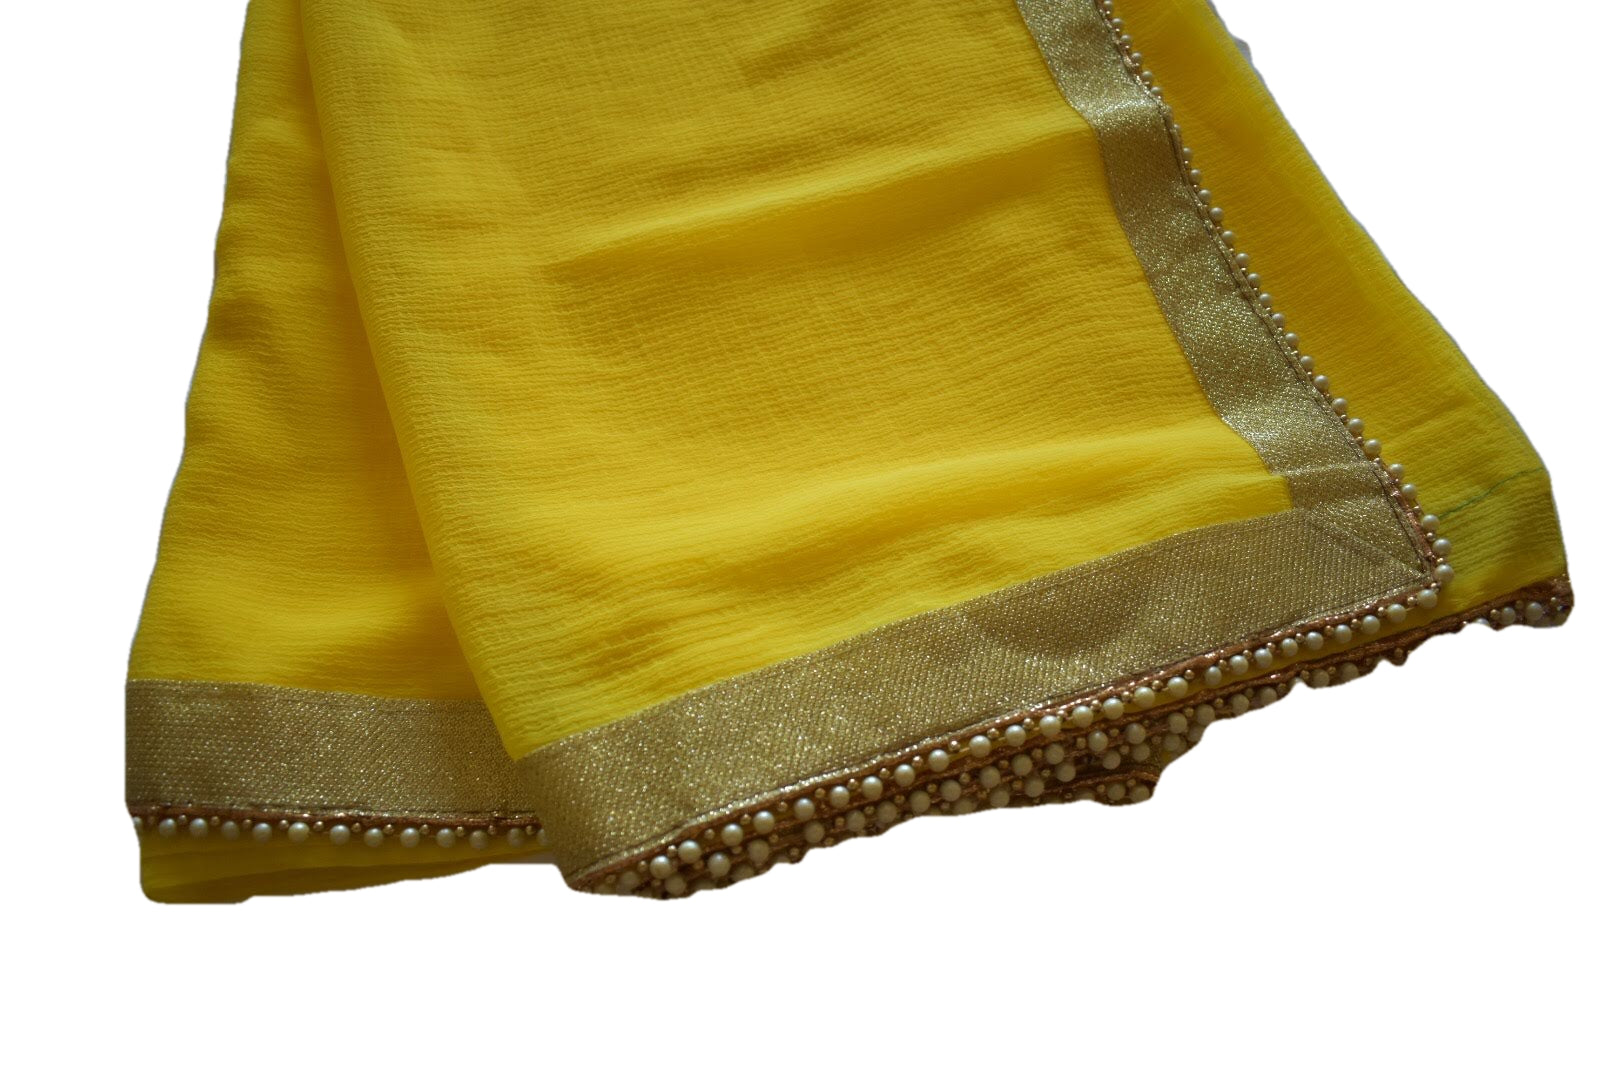 Yellow Color - Marble Textured Chiffon Saree - Golden Lace Border - Pearl Beads border